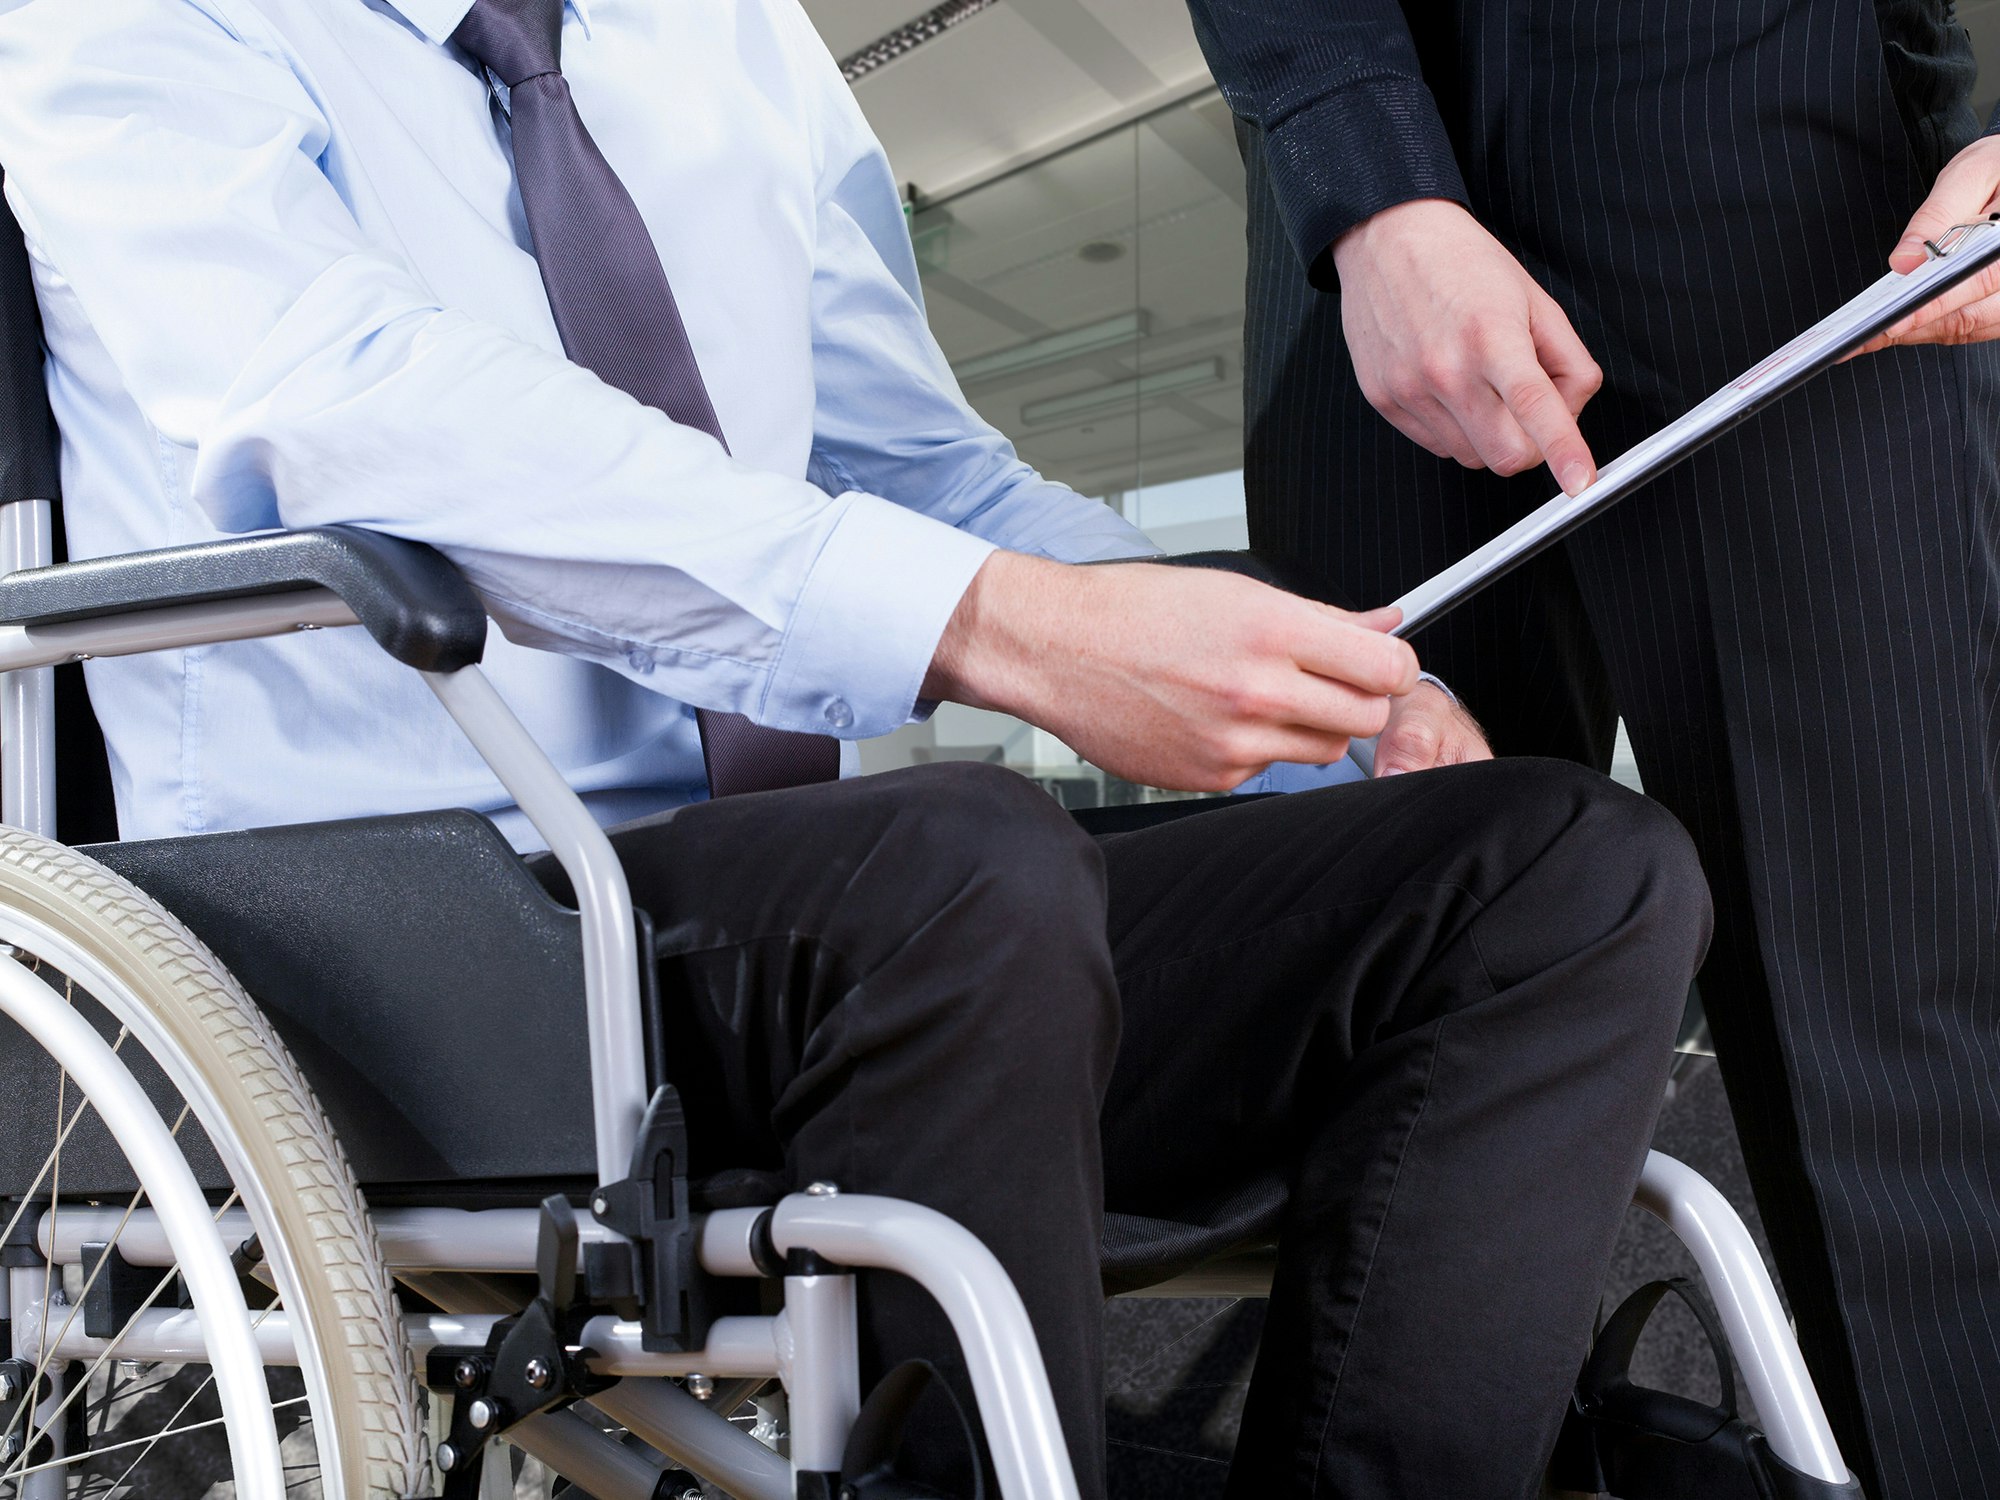 The upcoming AccessAbility Day aims to reduce unemployment for people with a disability. (Shutterstock)
